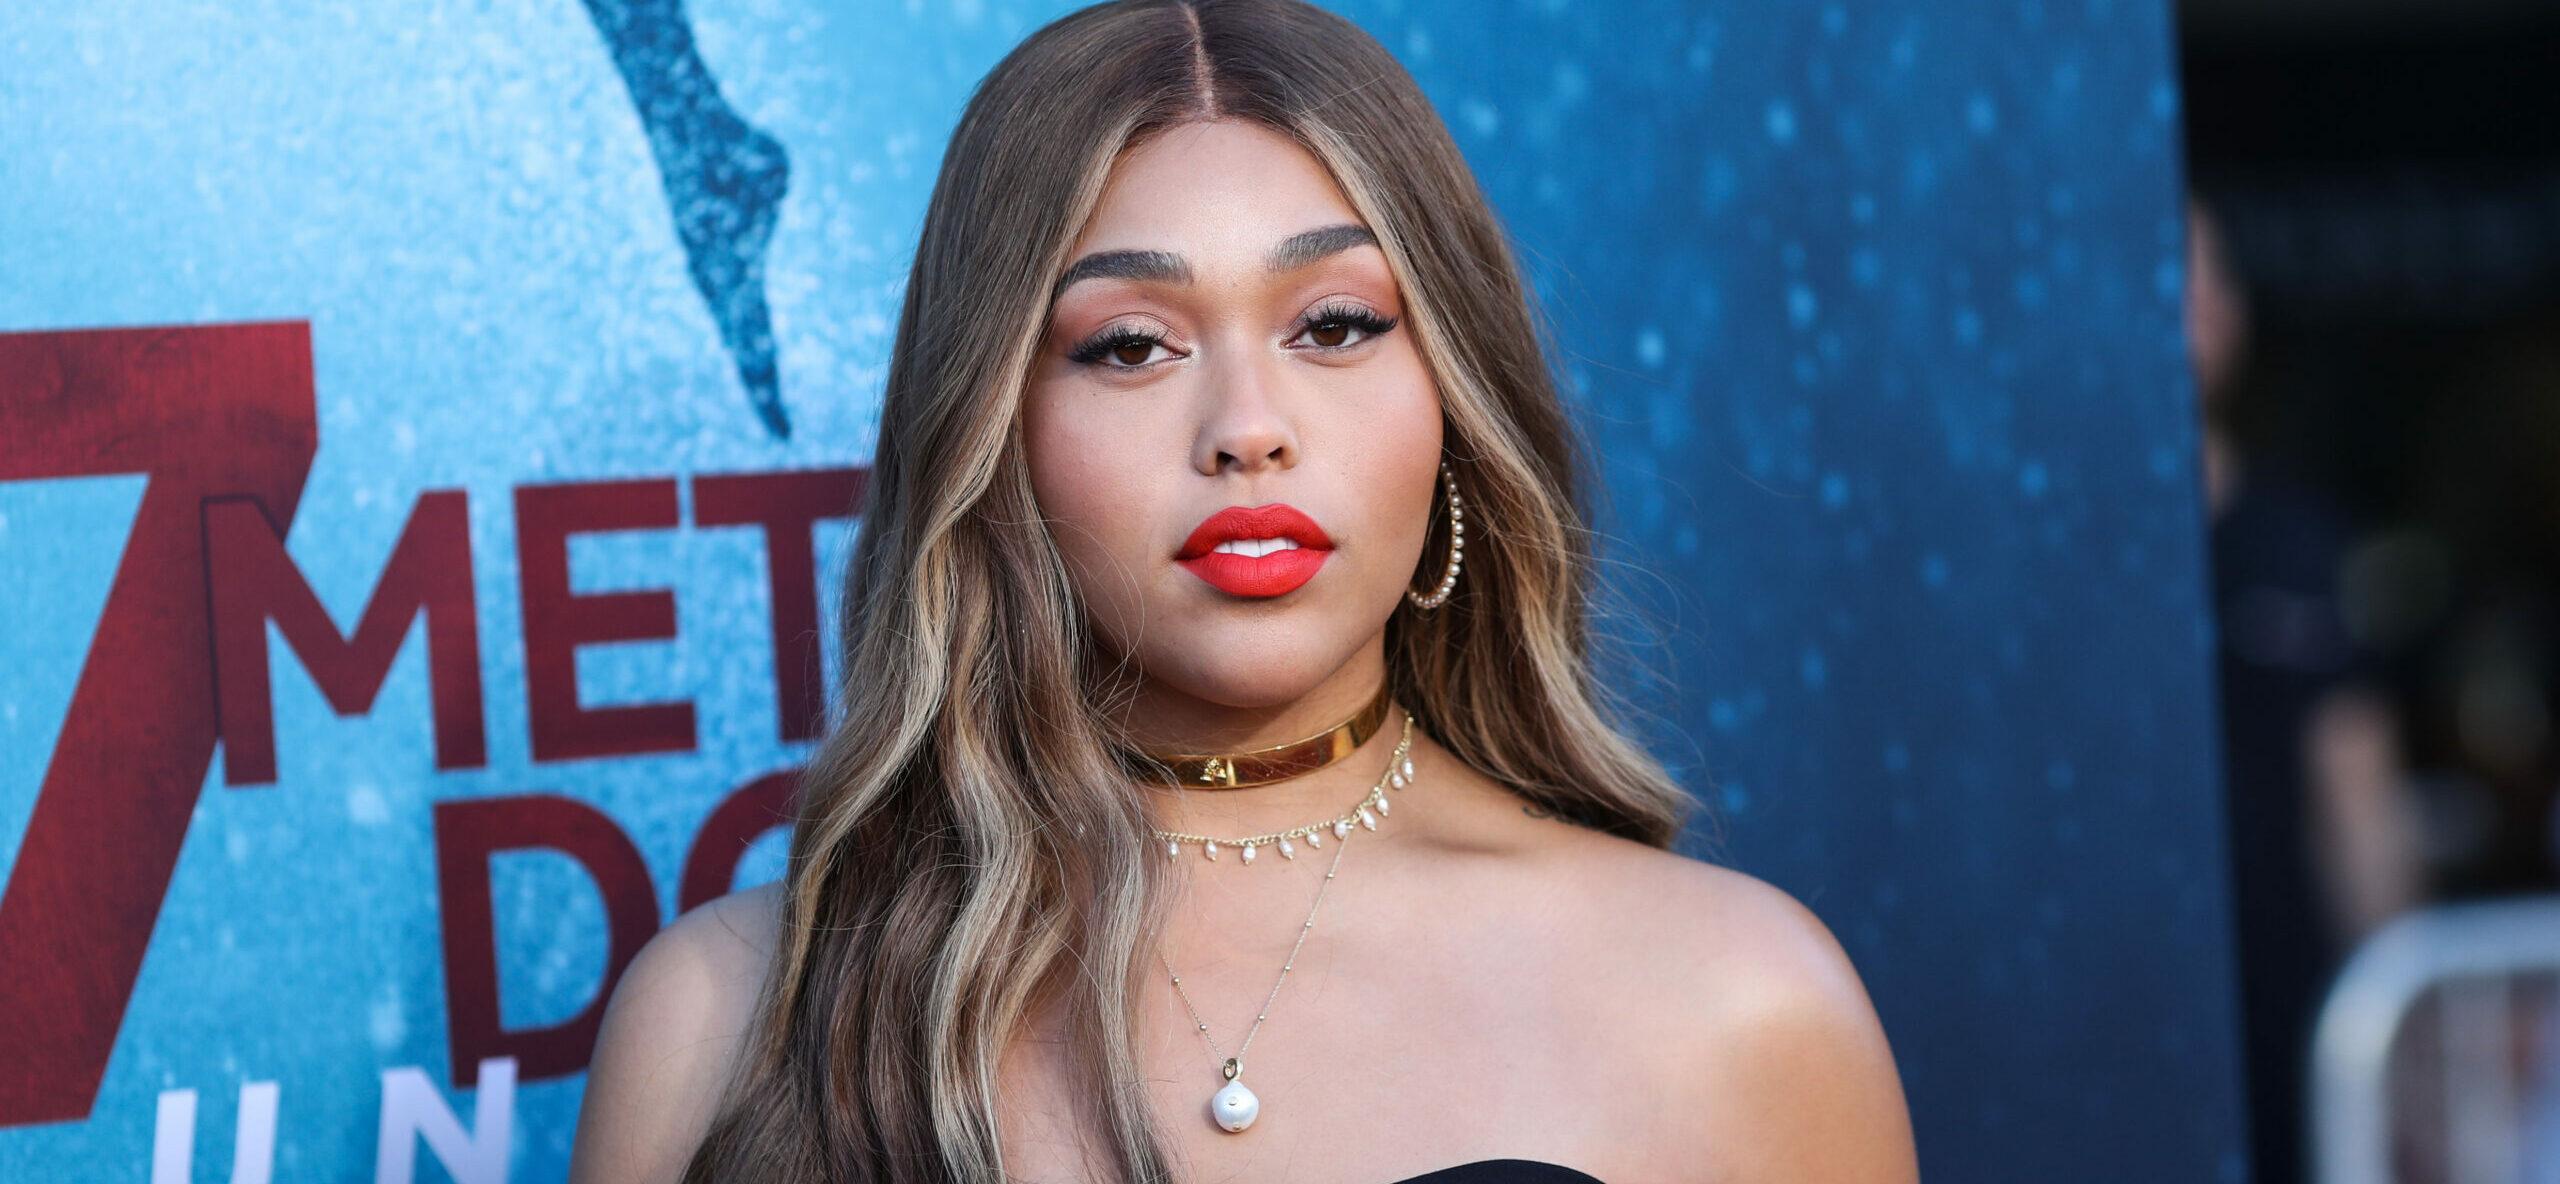 Jordyn Woods Shows Off Her Killer Style In Latest IG Photo